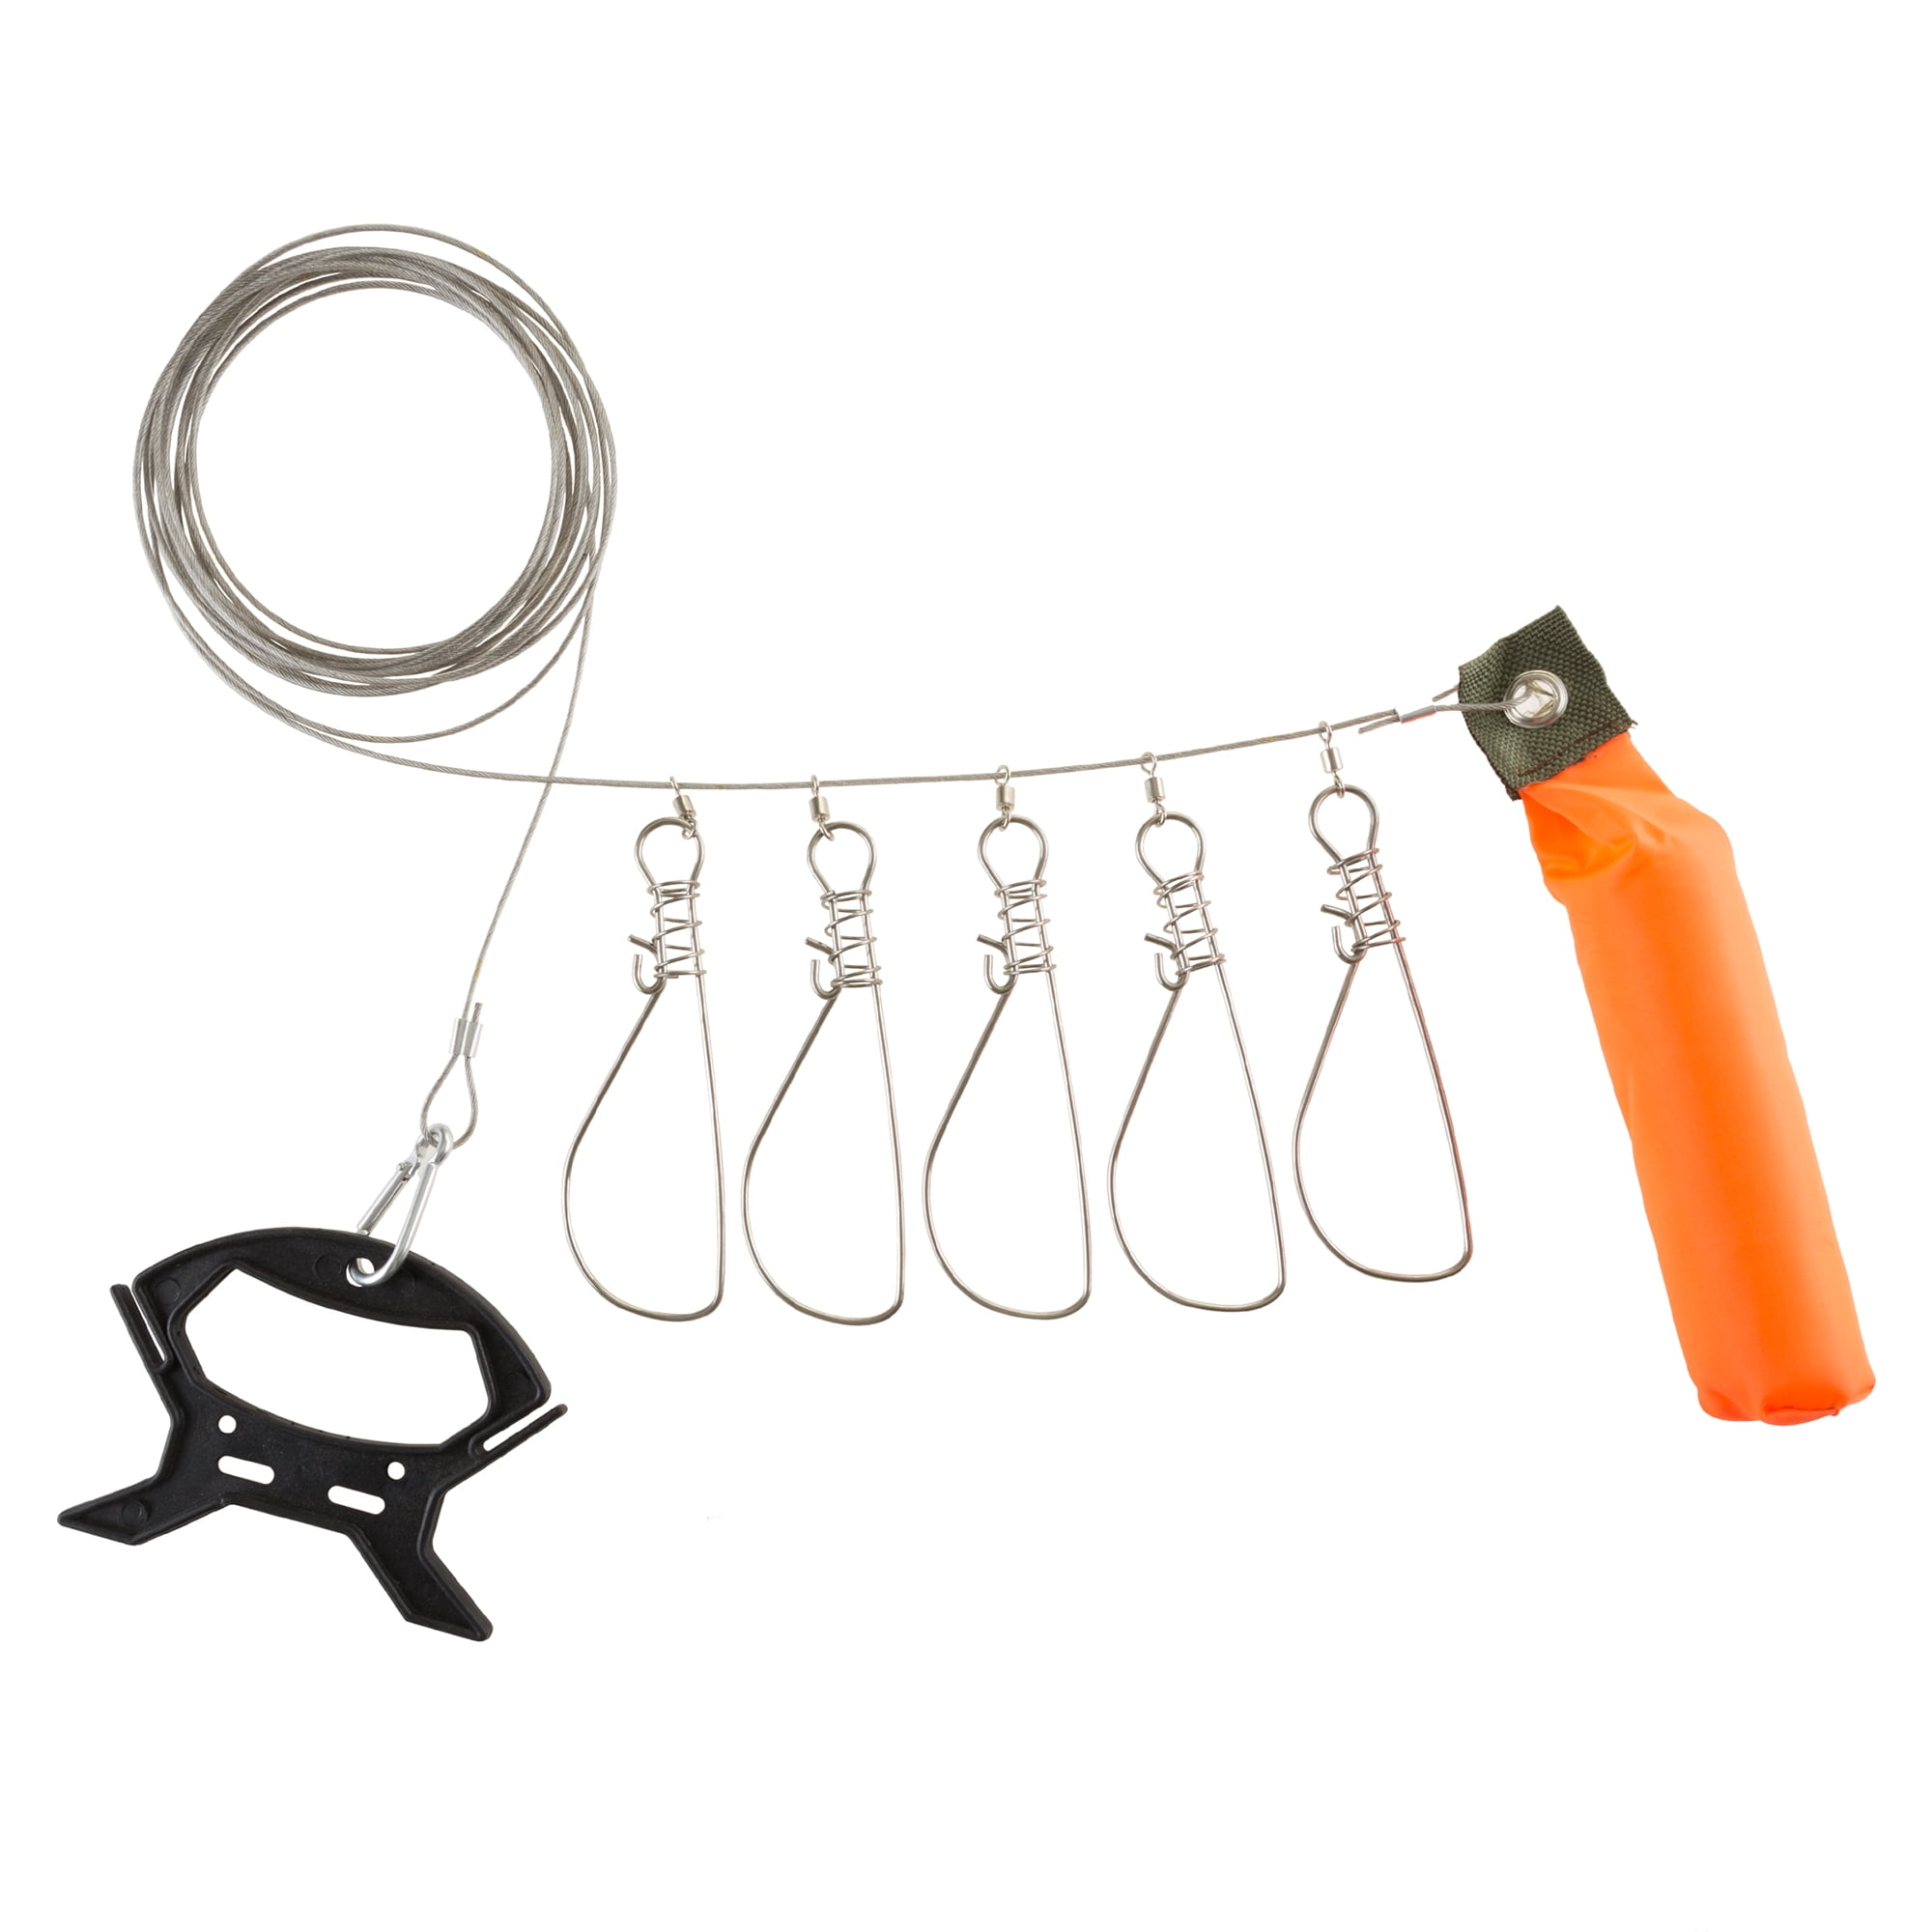 Fish Stringer- Heavy Duty Rope Stringer for Fishing with 5 Stainless Steel,  Tangle Free Hooks, Float and Plastic Handle By Wakeman Outdoors (16Â’4Â”)